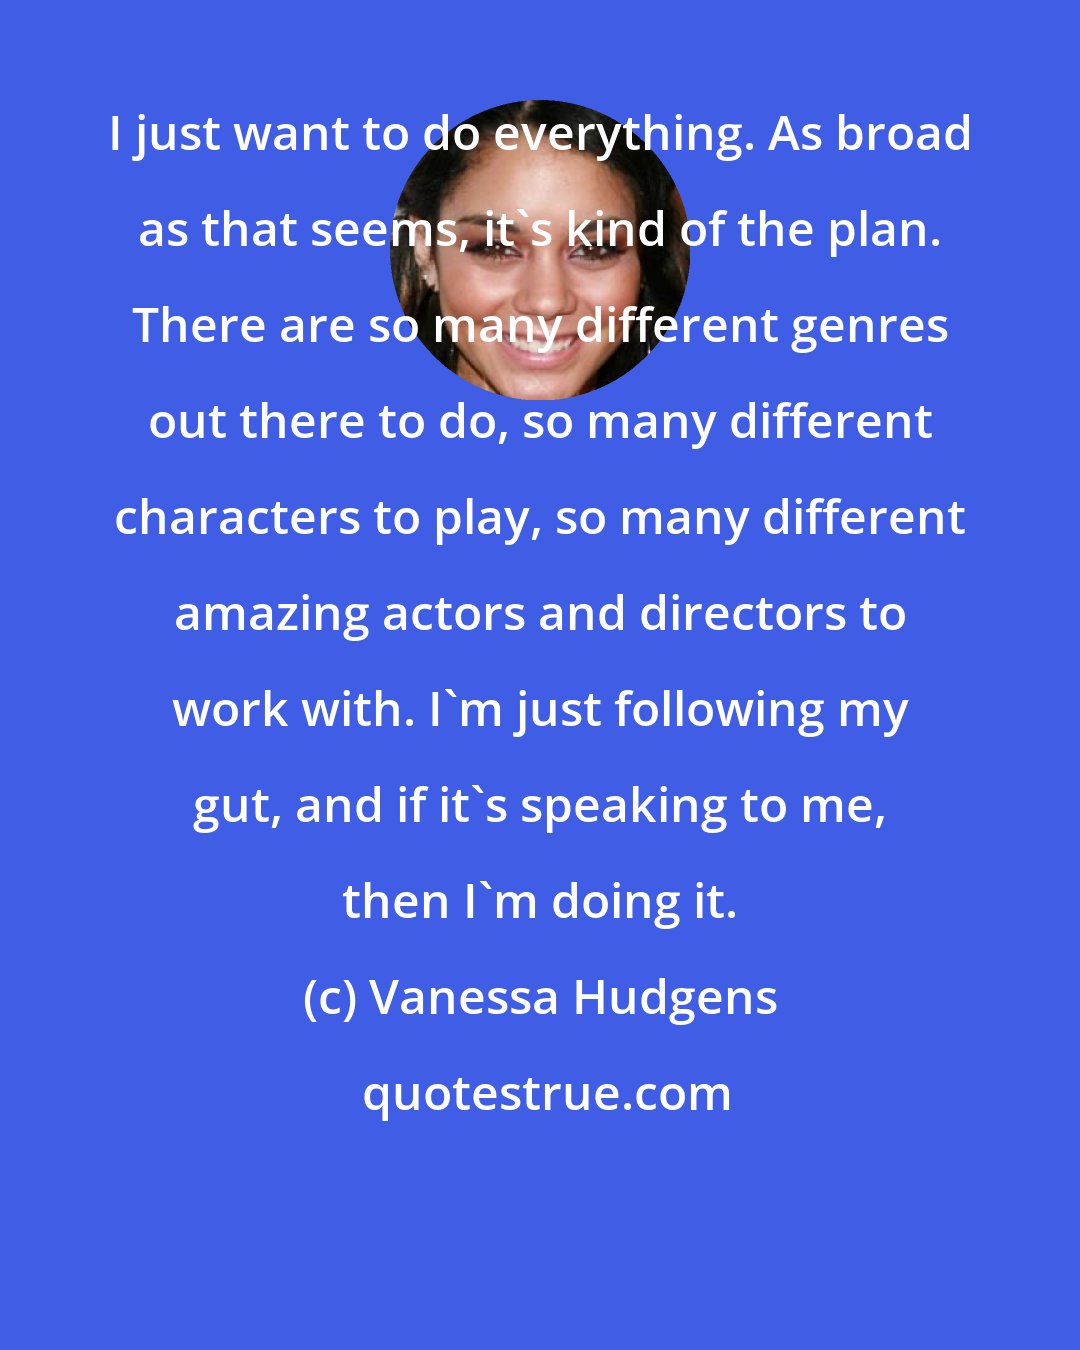 Vanessa Hudgens: I just want to do everything. As broad as that seems, it's kind of the plan. There are so many different genres out there to do, so many different characters to play, so many different amazing actors and directors to work with. I'm just following my gut, and if it's speaking to me, then I'm doing it.